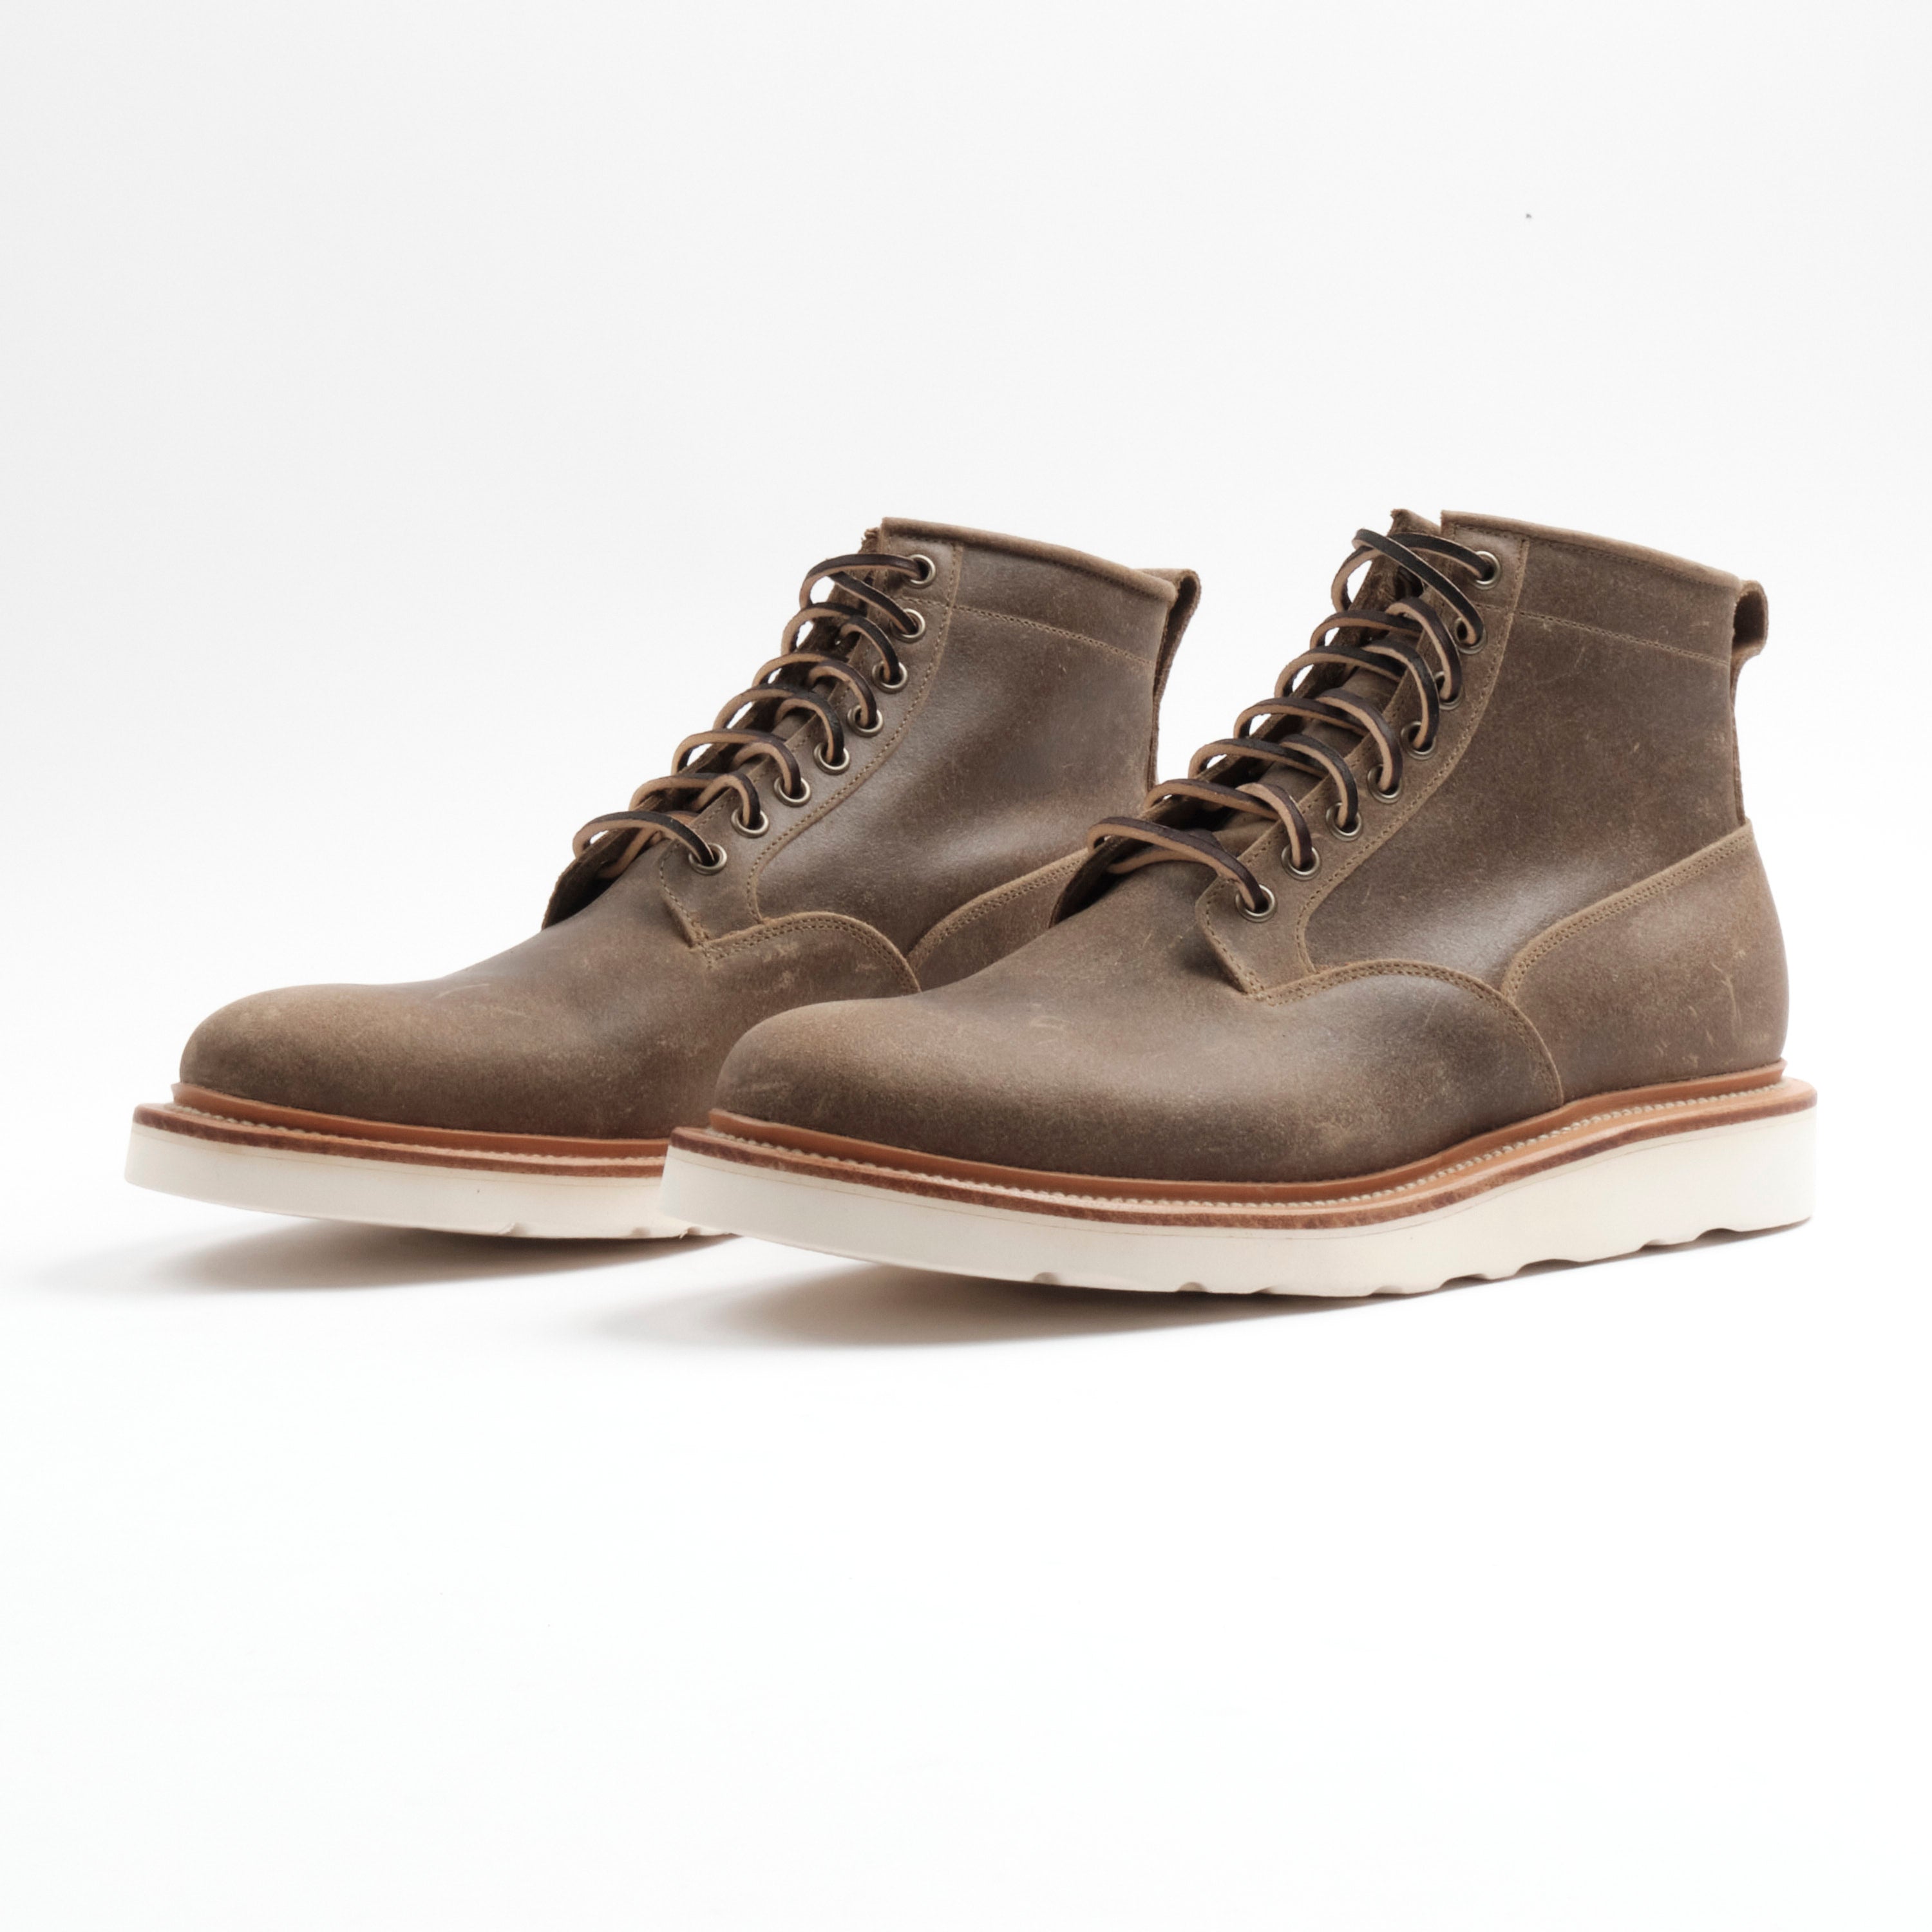 VIBERG SCOUT BOOT - NATURE WAXY COMMANDER